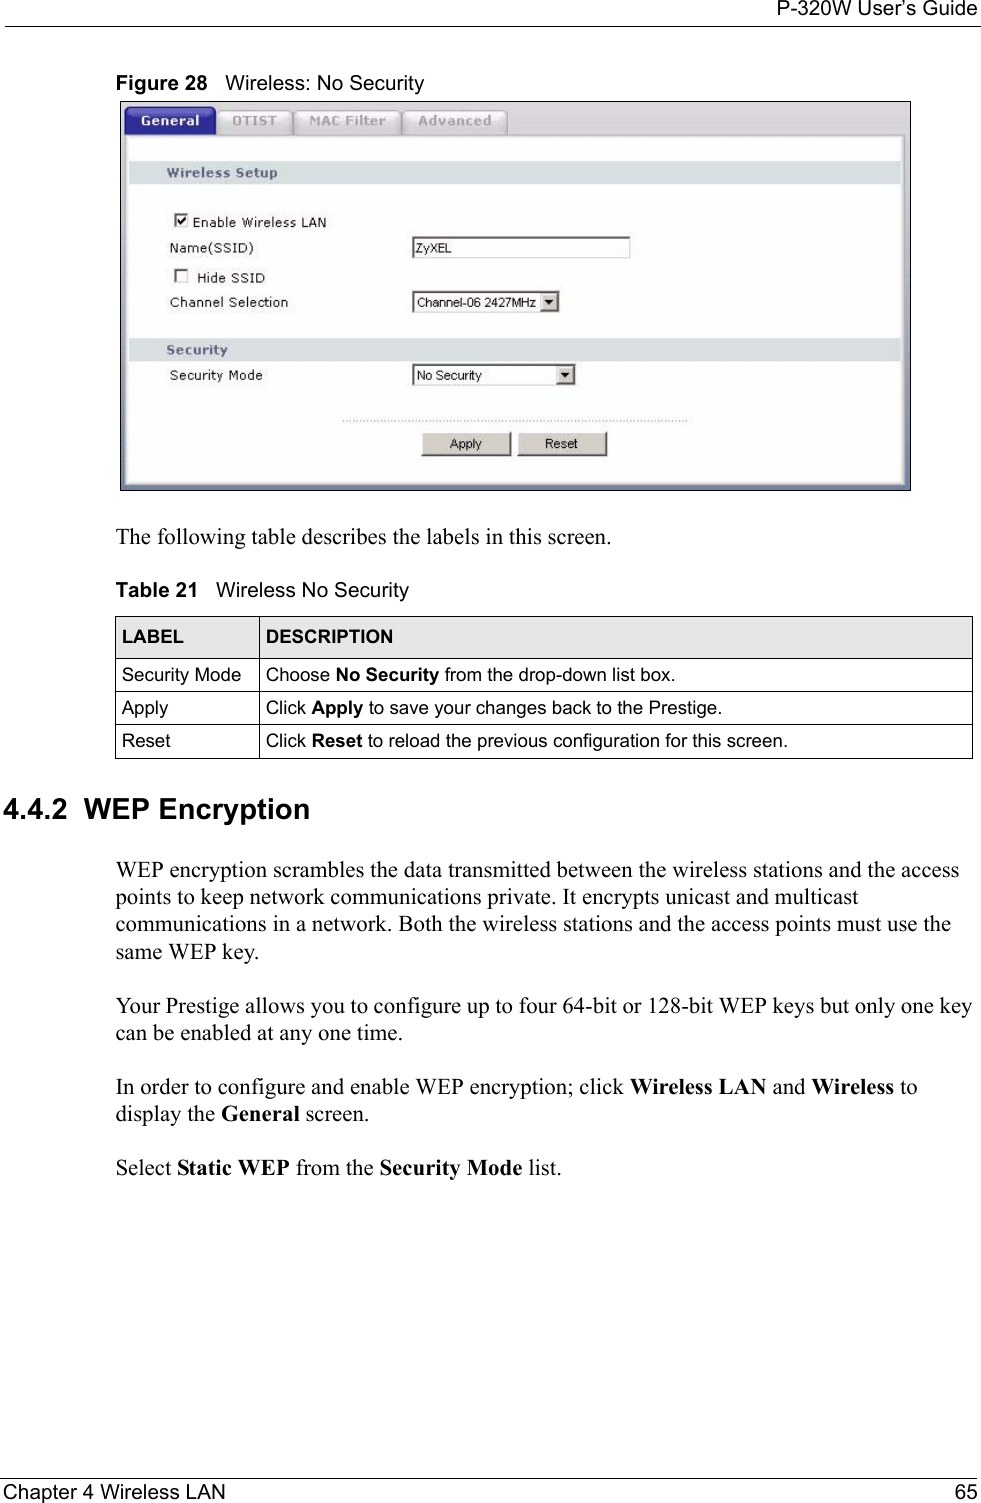 P-320W User’s GuideChapter 4 Wireless LAN 65Figure 28   Wireless: No SecurityThe following table describes the labels in this screen.Table 21   Wireless No SecurityLABEL DESCRIPTIONSecurity Mode Choose No Security from the drop-down list box.Apply Click Apply to save your changes back to the Prestige.Reset Click Reset to reload the previous configuration for this screen.4.4.2  WEP EncryptionWEP encryption scrambles the data transmitted between the wireless stations and the access points to keep network communications private. It encrypts unicast and multicast communications in a network. Both the wireless stations and the access points must use the same WEP key.Your Prestige allows you to configure up to four 64-bit or 128-bit WEP keys but only one key can be enabled at any one time.In order to configure and enable WEP encryption; click Wireless LAN and Wireless to display the General screen.Select Static WEP from the Security Mode list.